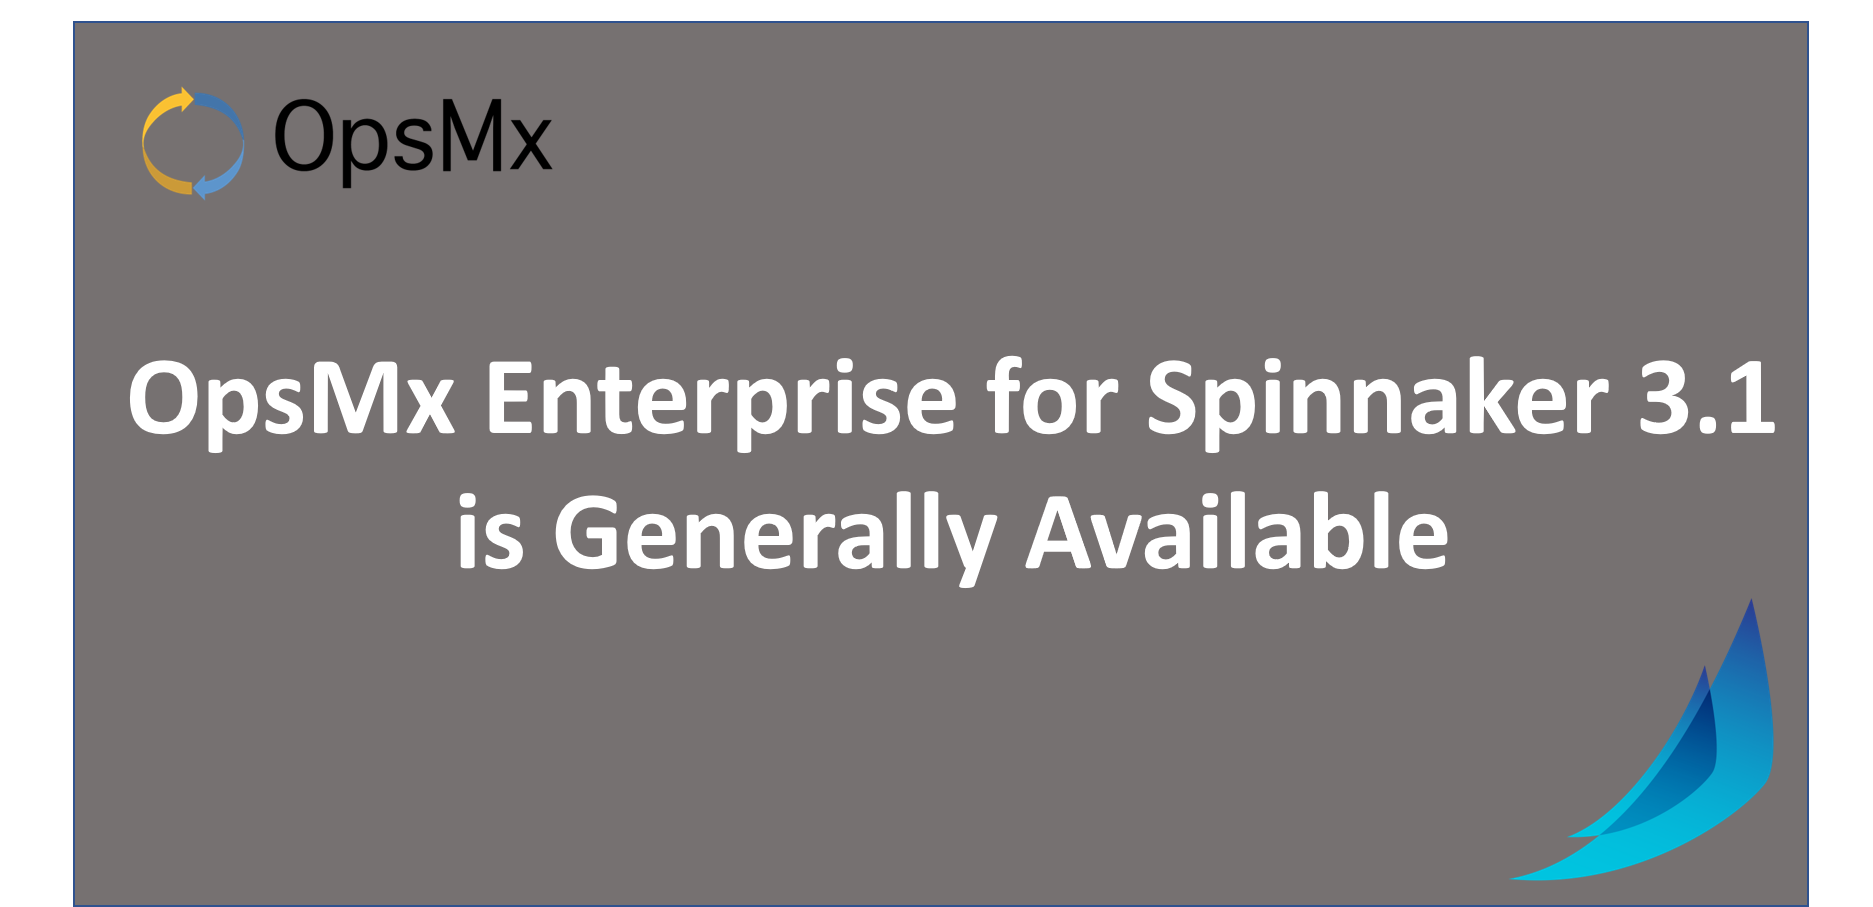 OpsMx Enterprise for Spinnaker 3.1 release is now Generally Available diagram